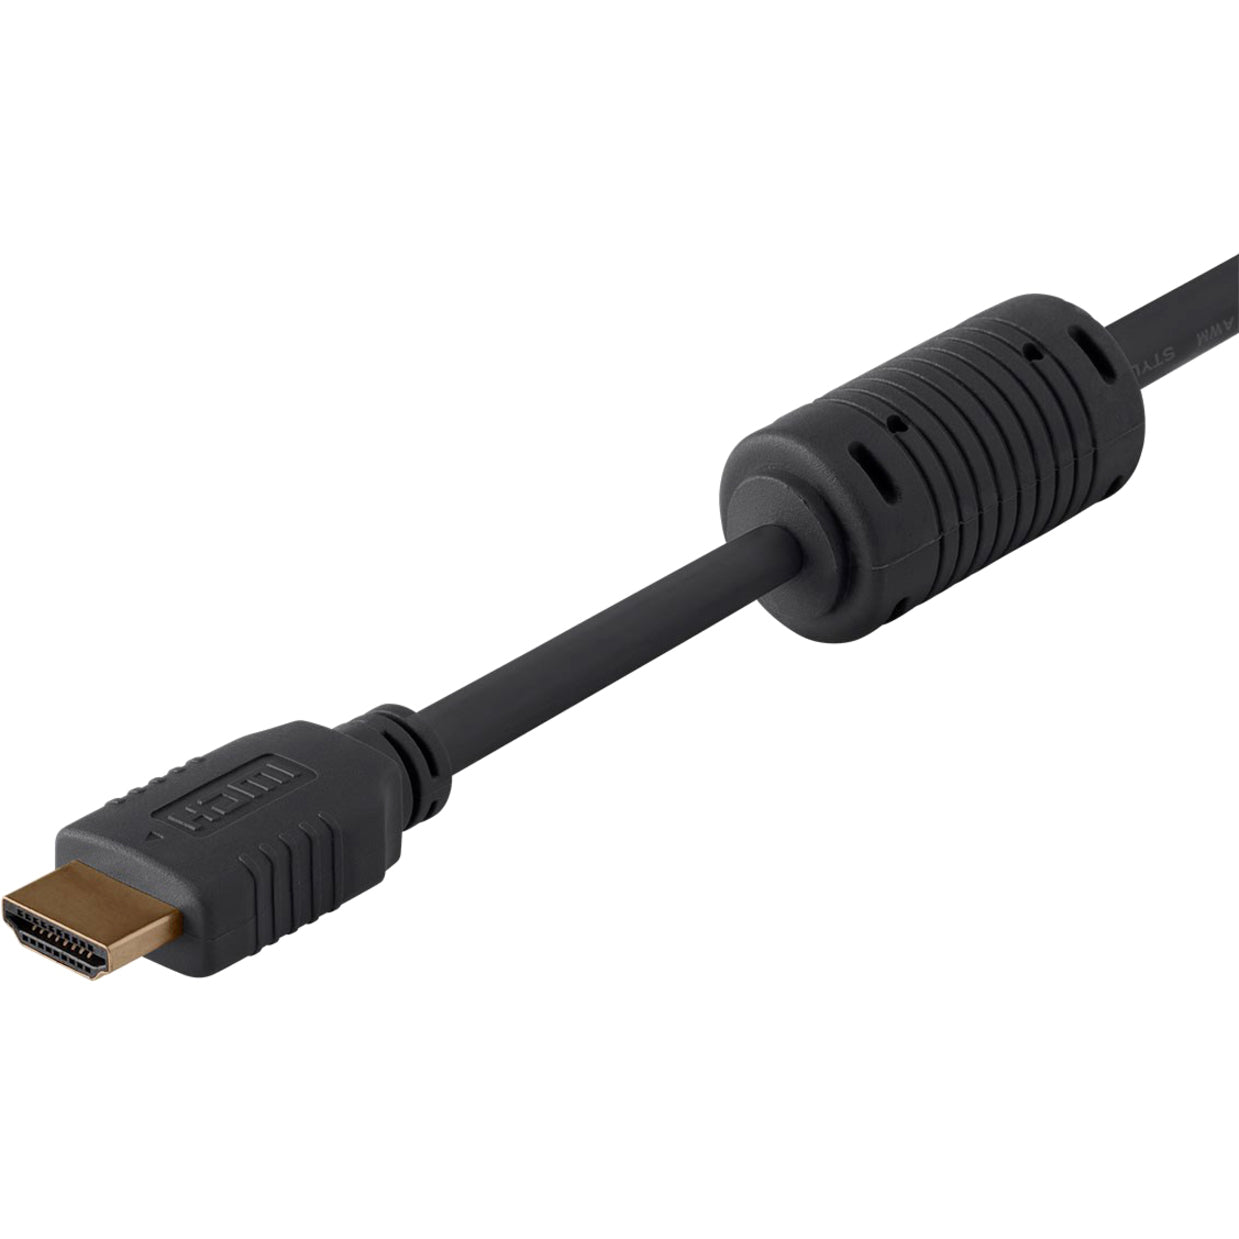 Monoprice 3871 Select Series High Speed HDMI Cable, 3ft Black, Audio Return Channel (ARC)